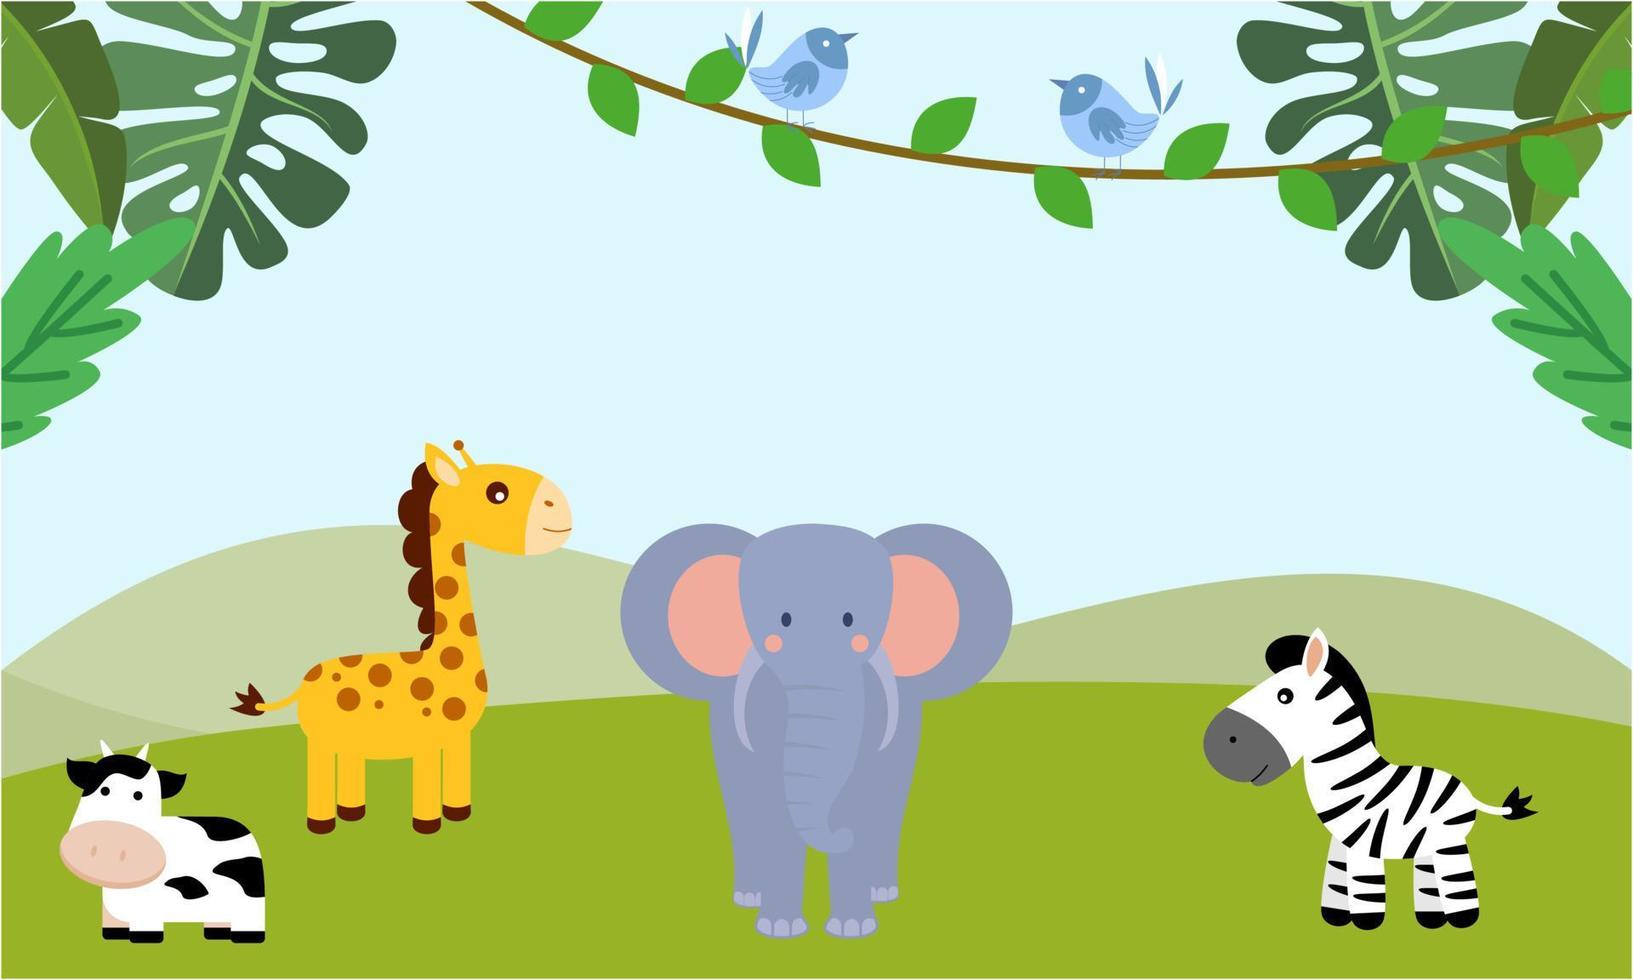 Cute jungle animals in cartoon style, wild animal, zoo designs for background illustration vector